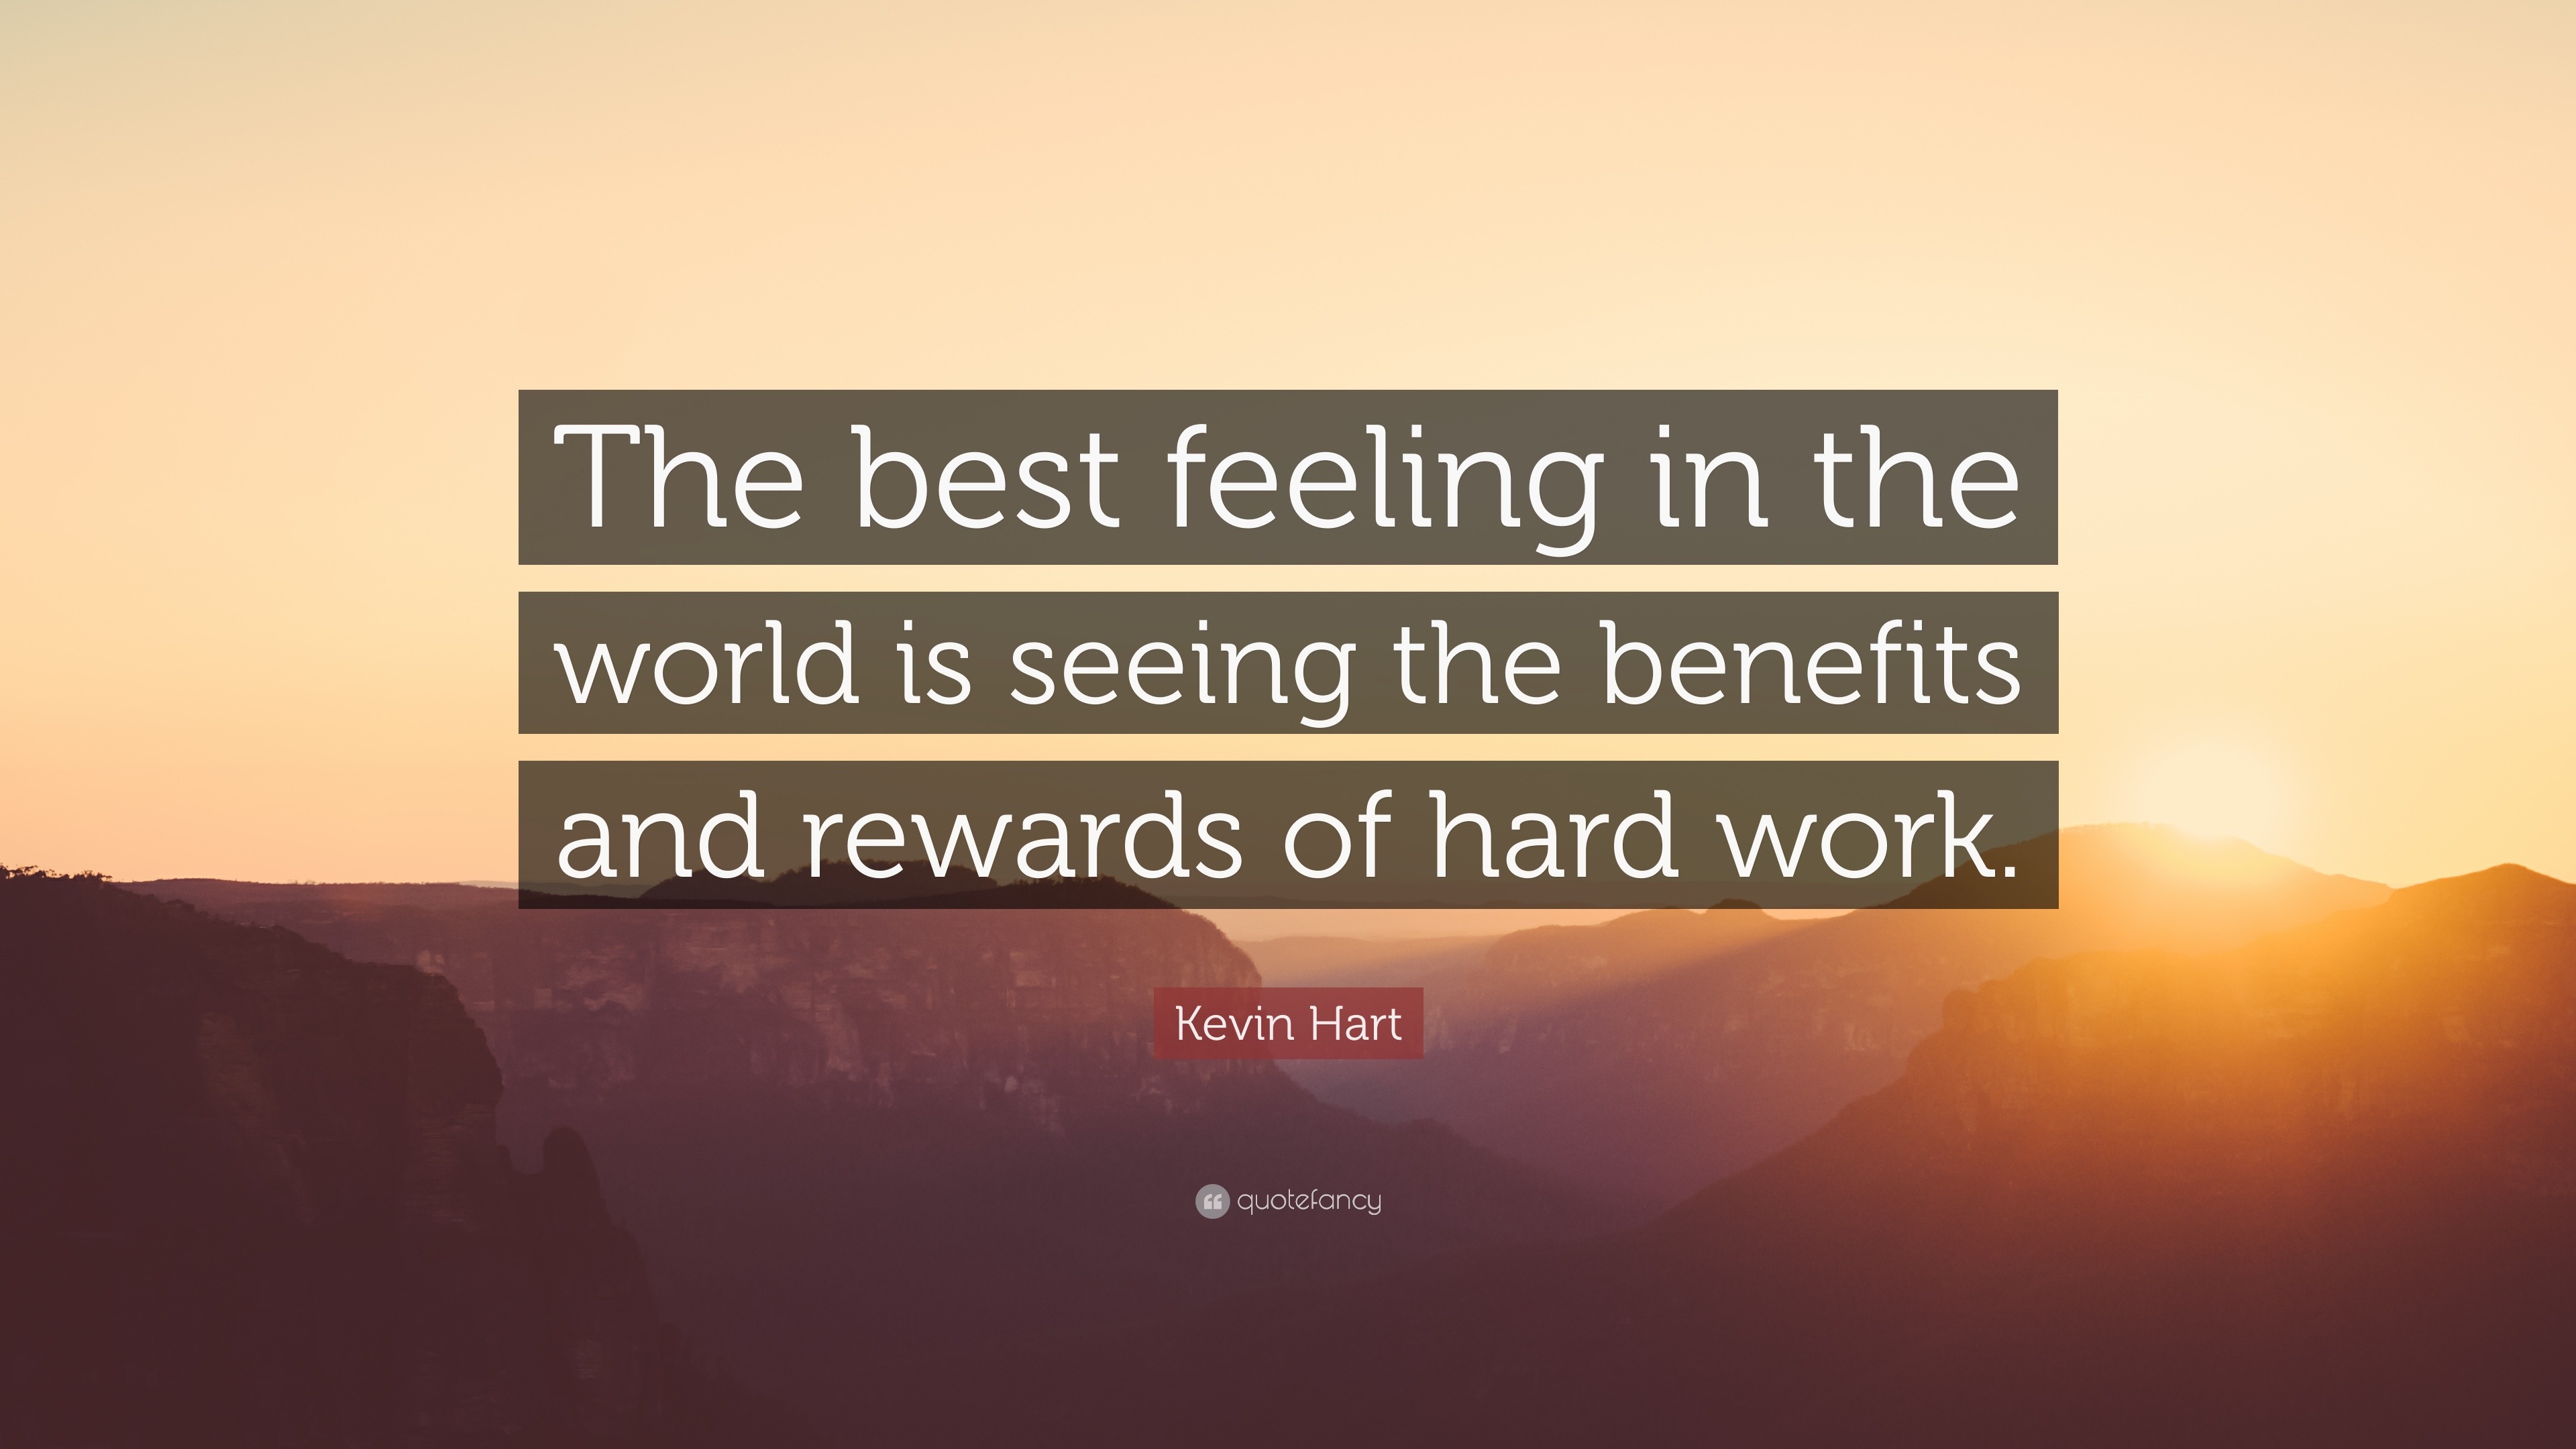 Kevin Hart Quote: "The best feeling in the world is seeing ...